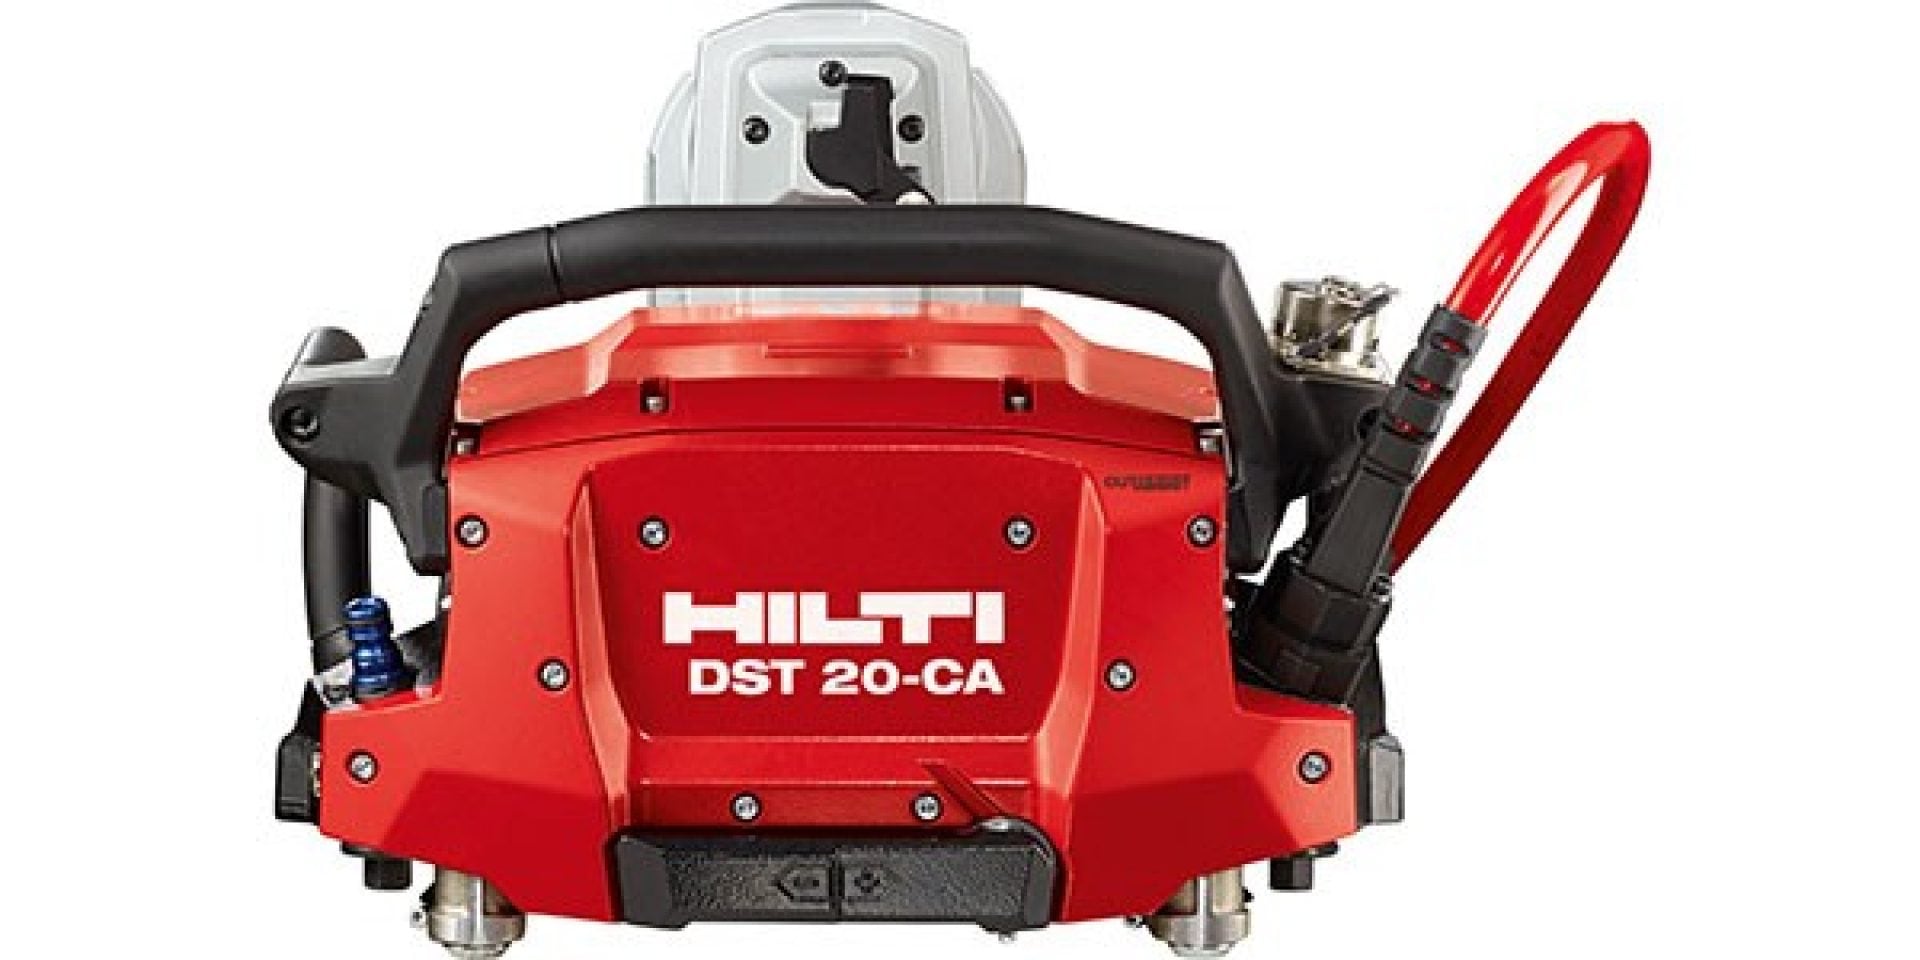 Hilti Electric diamond wall saw is light with high power-to-weight ratio